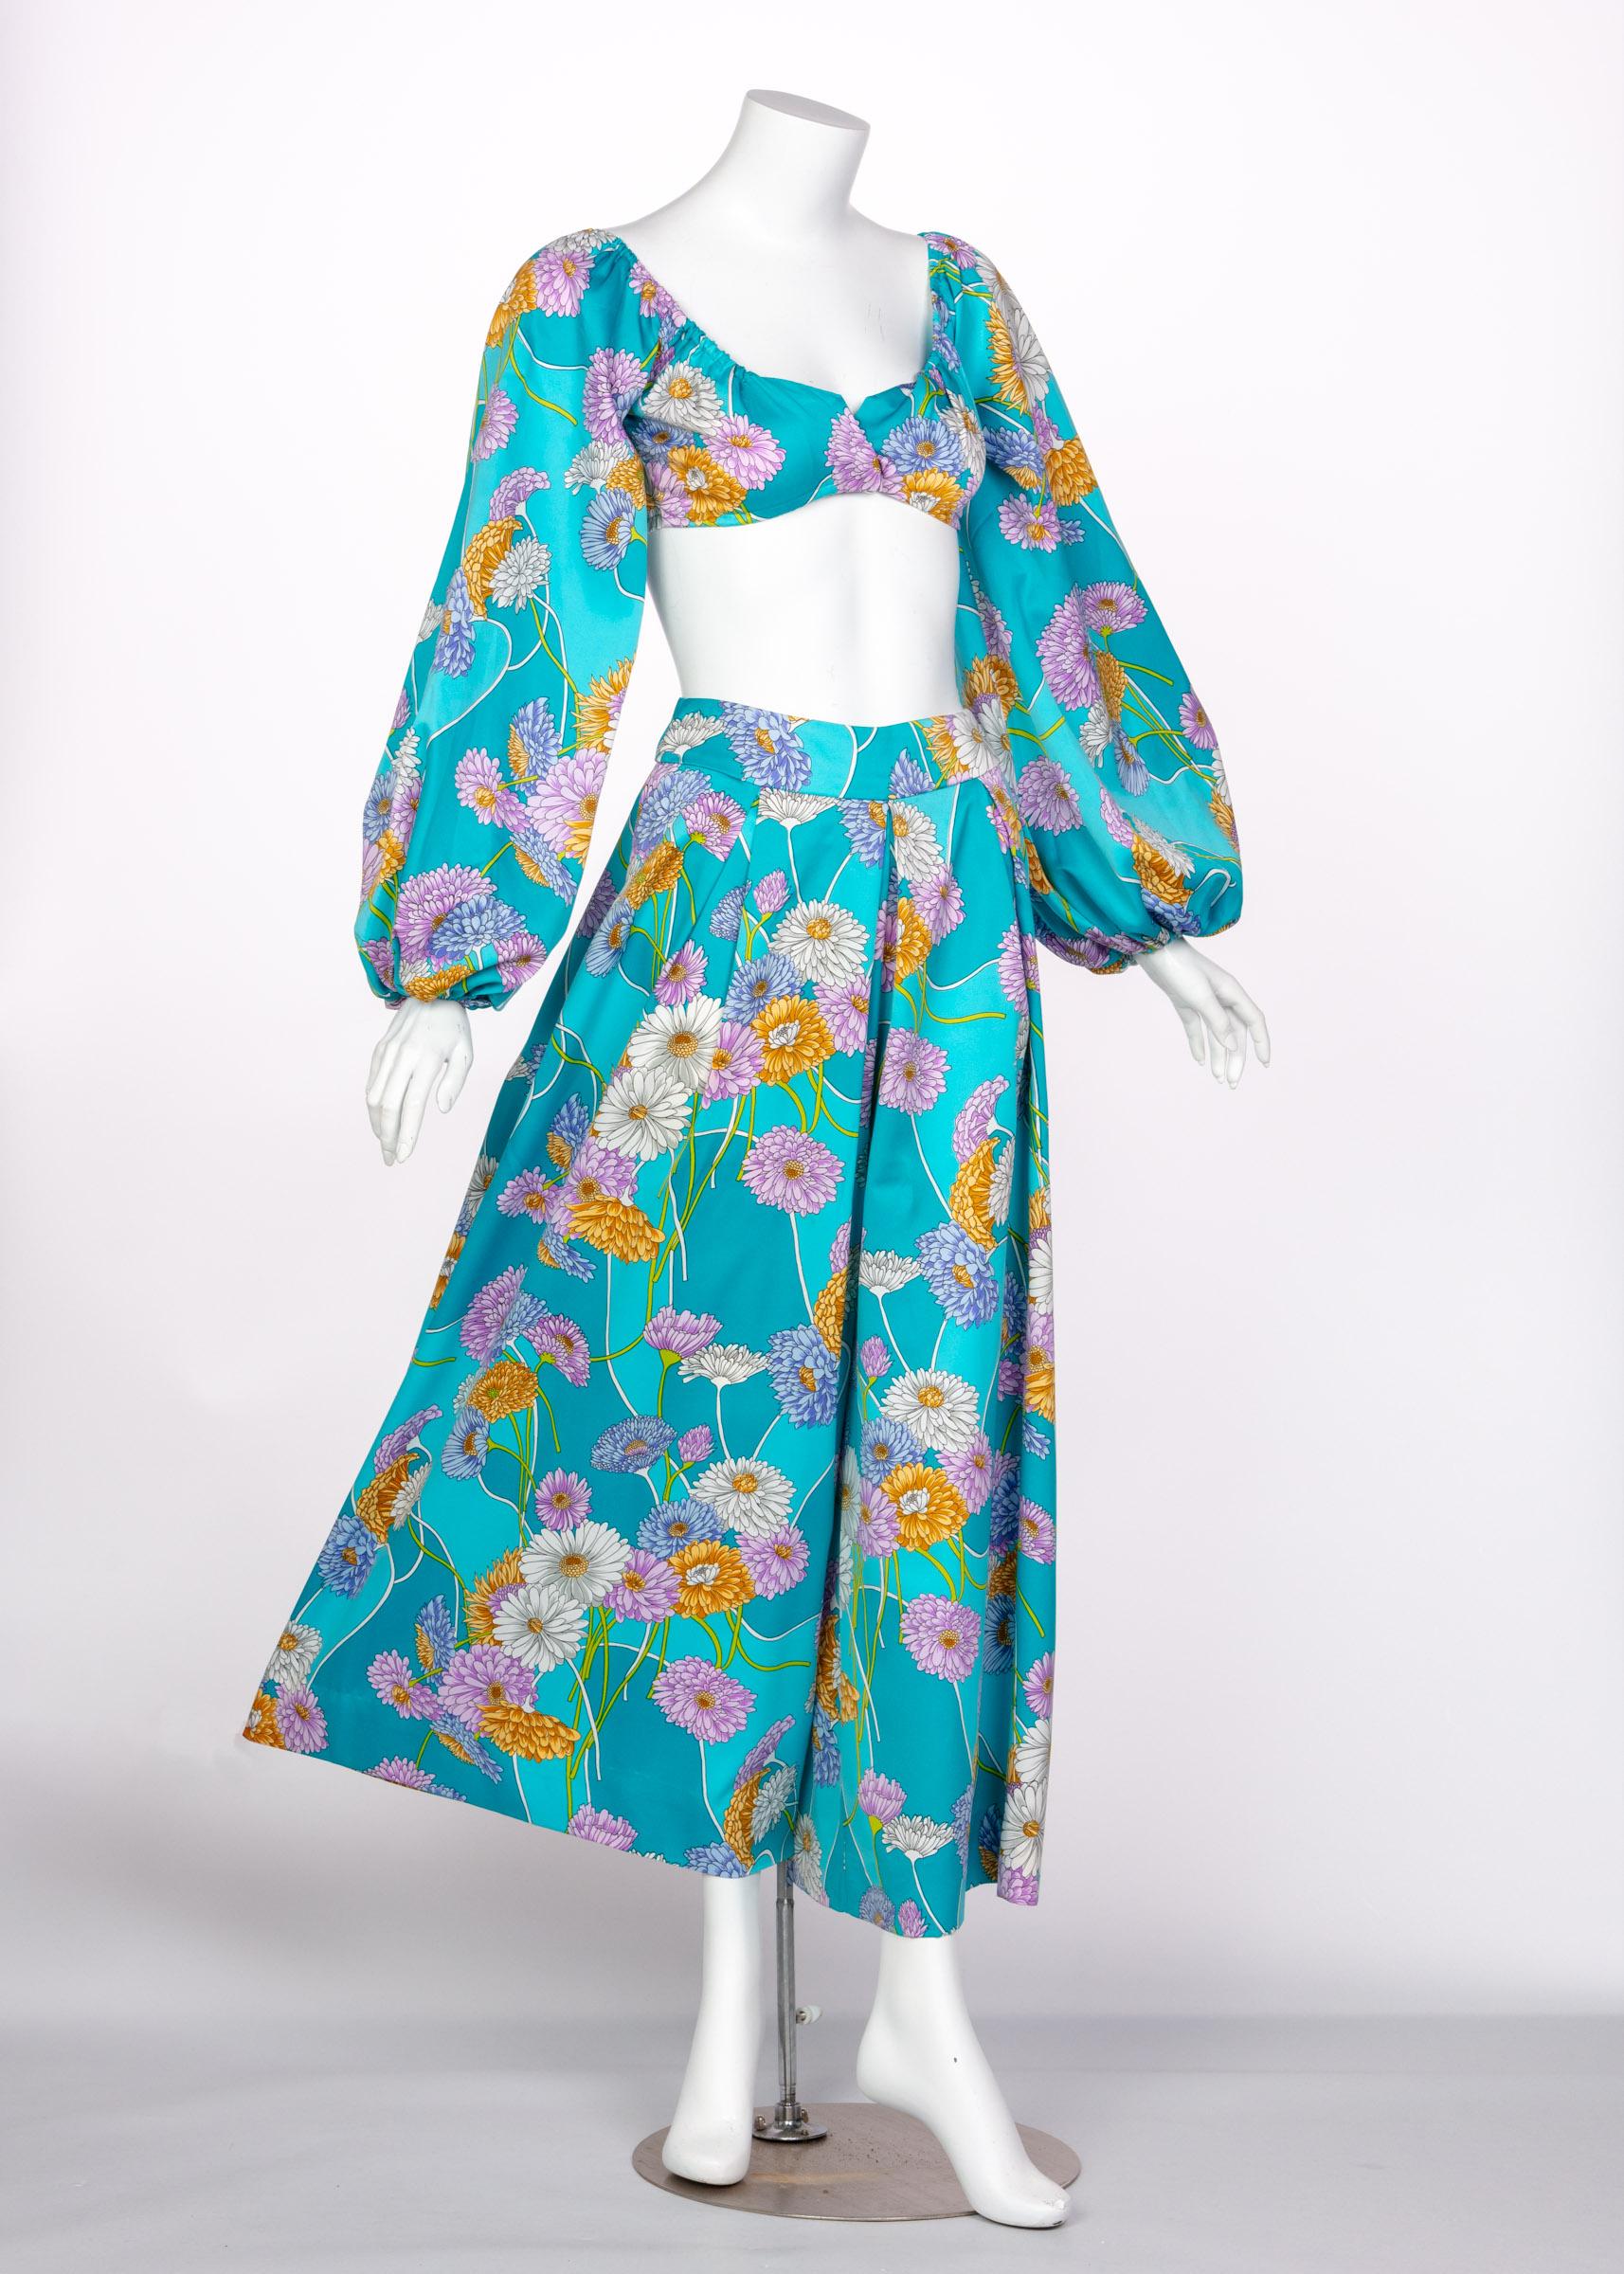 Rife with a variety of styles and cultural influences, the 1970s were filled with flamboyant and playful colors and styles. With growing social movements, two-piece ensembles became increasingly stylish for women. A bold turquoise satin creates this